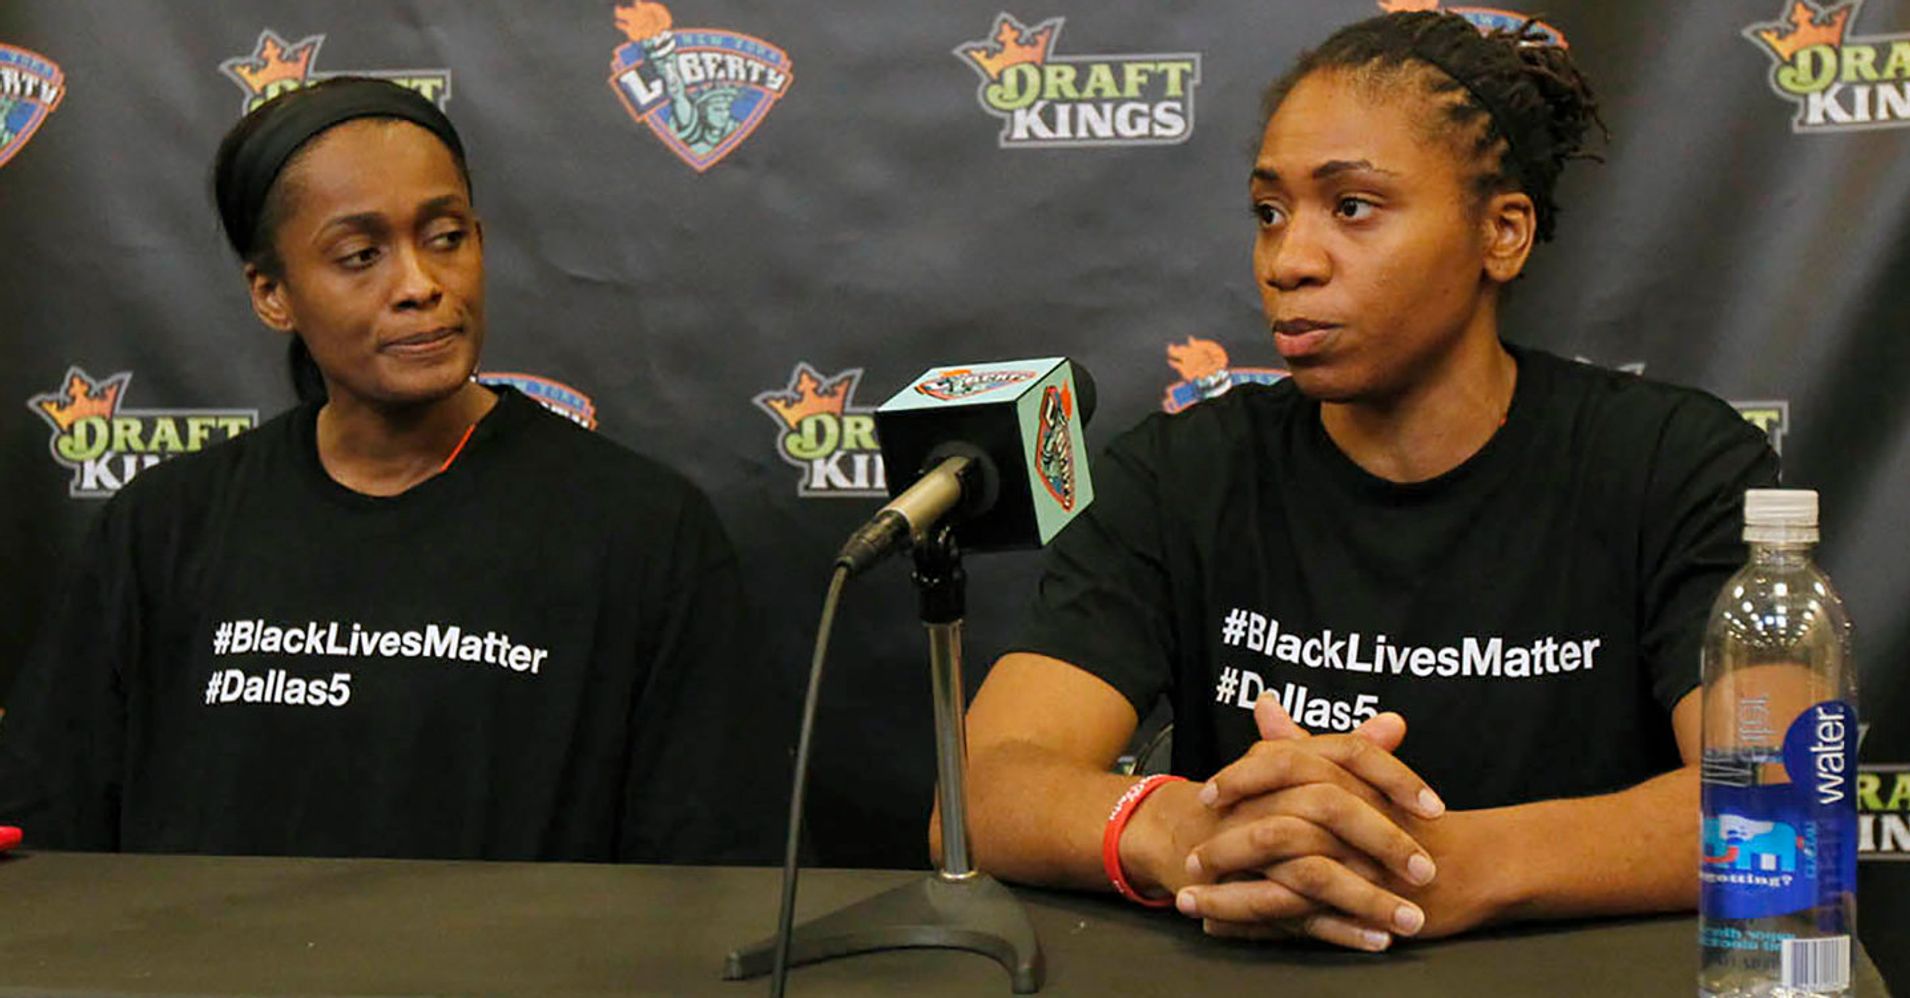 New York Liberty Players Wear BlackLivesMatter Shirts Before Their